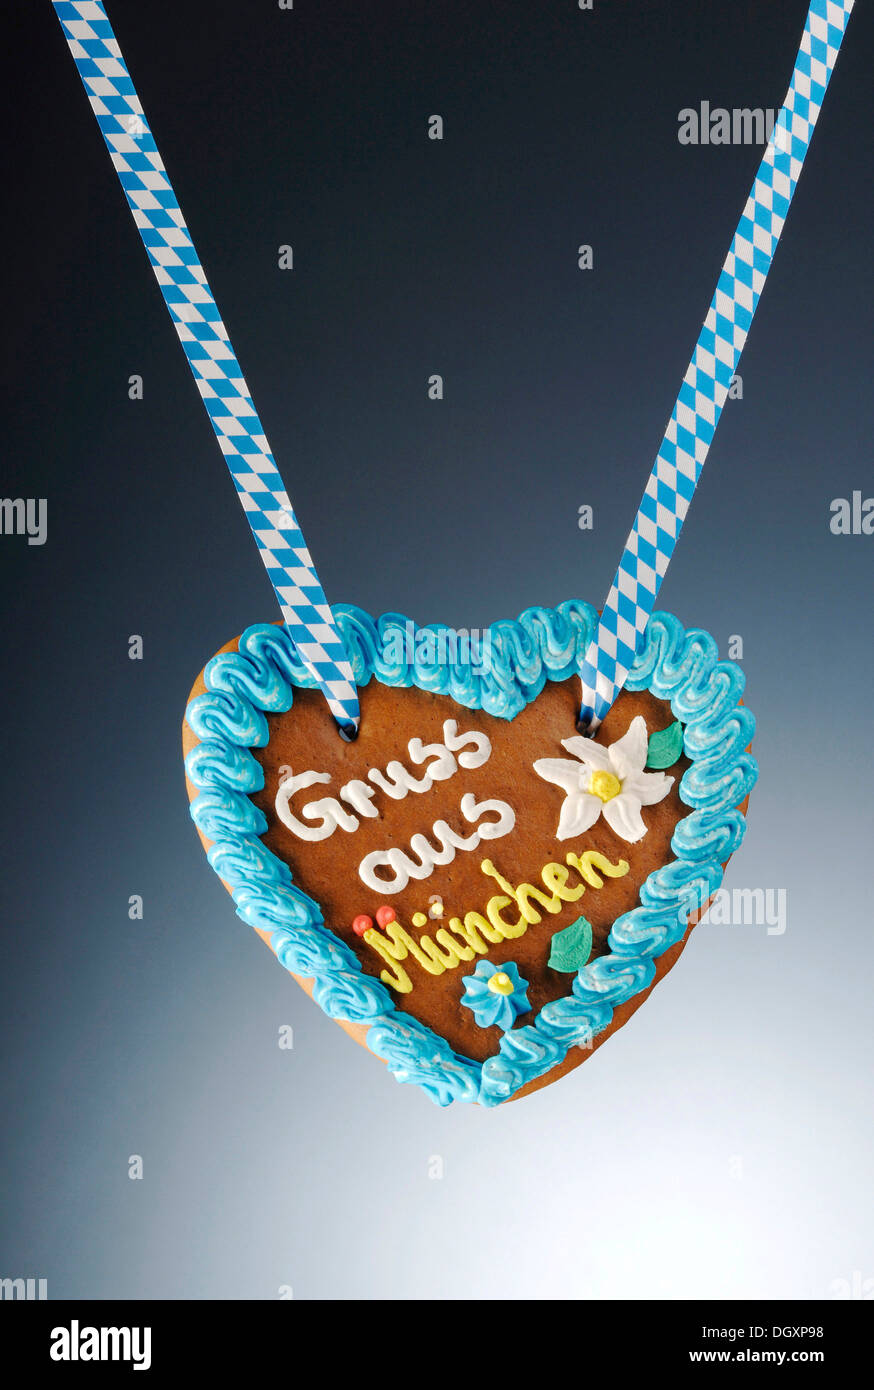 Gingerbread heart with the message 'Gruss aus Muenchen', German for 'Greetings from Munich' Stock Photo